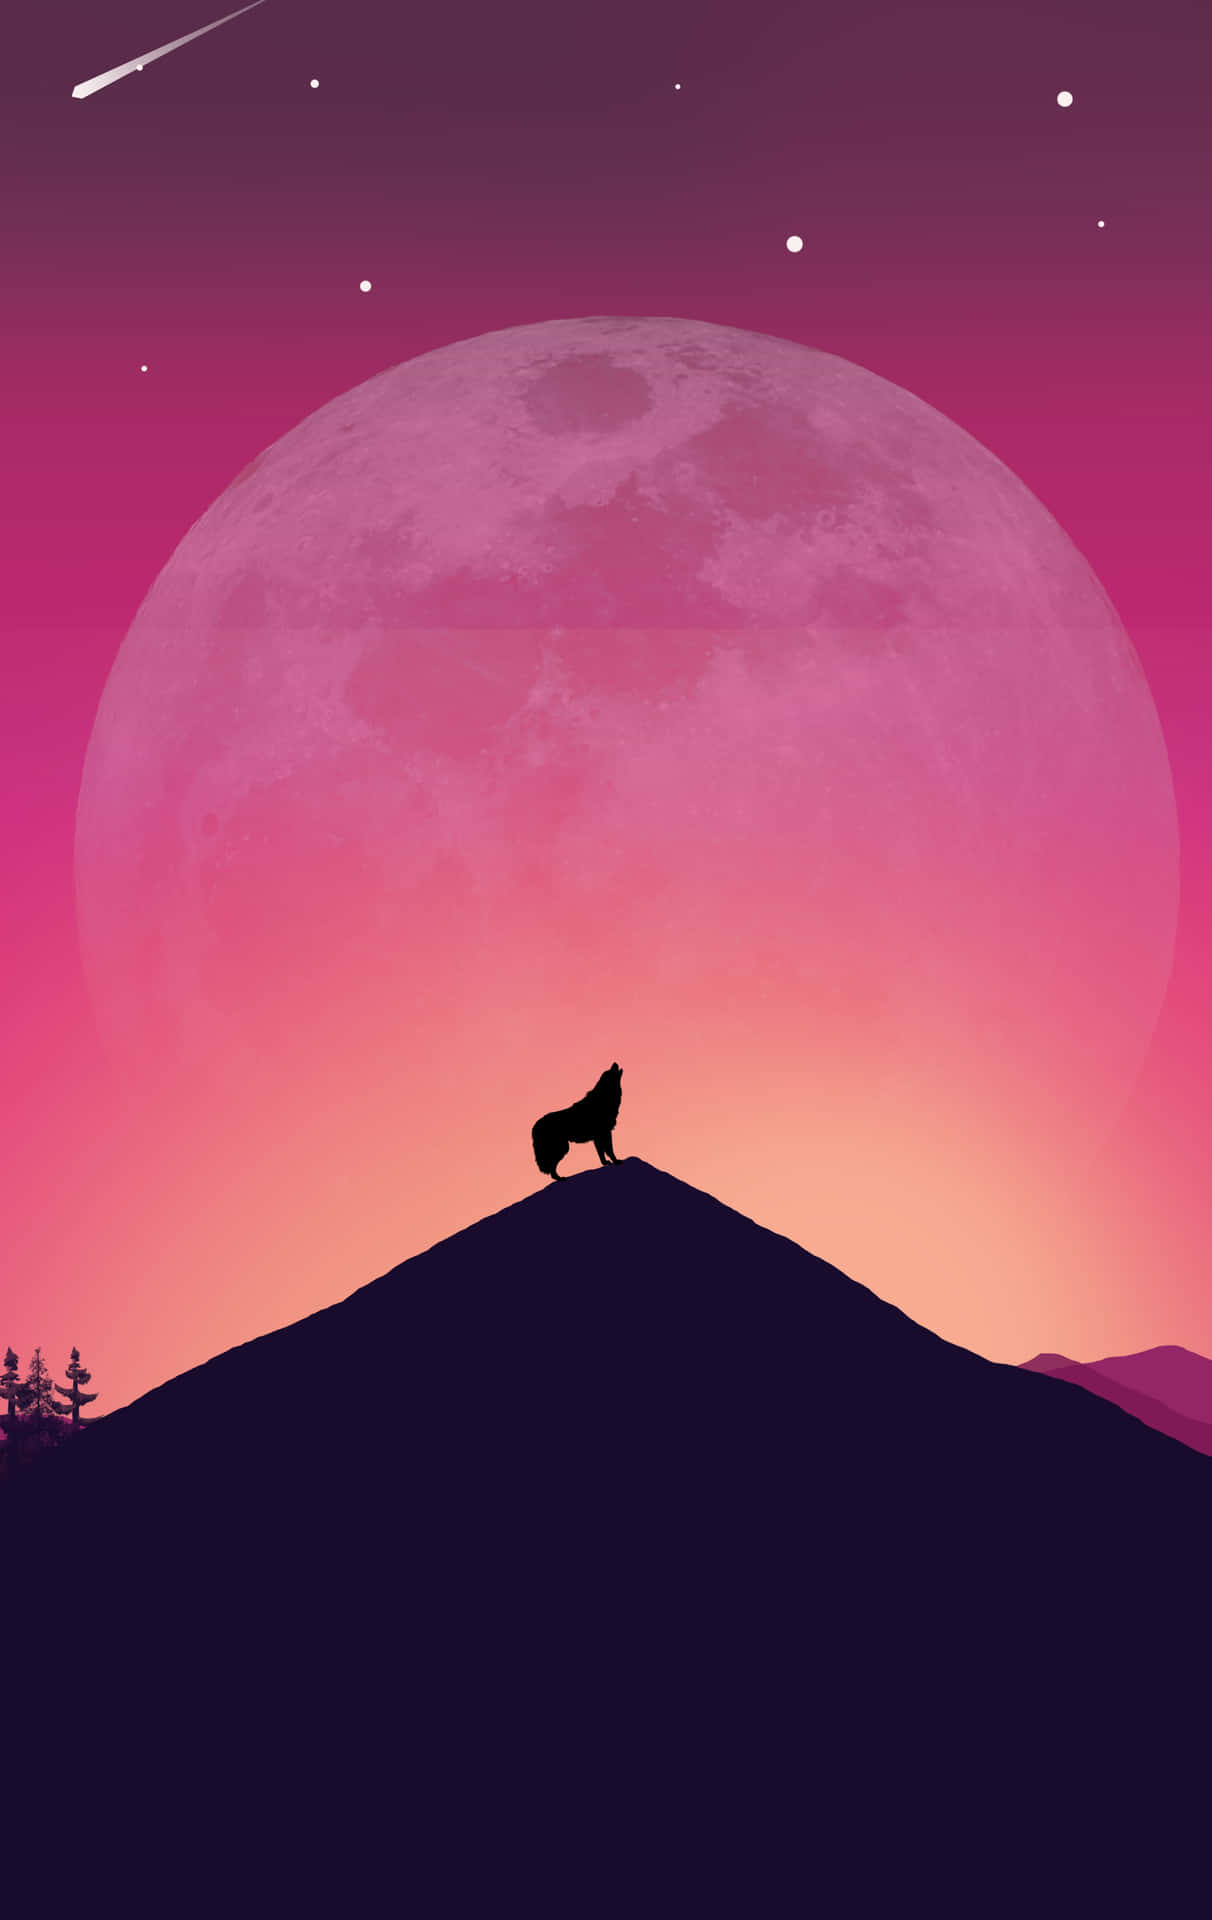 A majestic pink wolf stares into the distance with a quiet curiosity Wallpaper